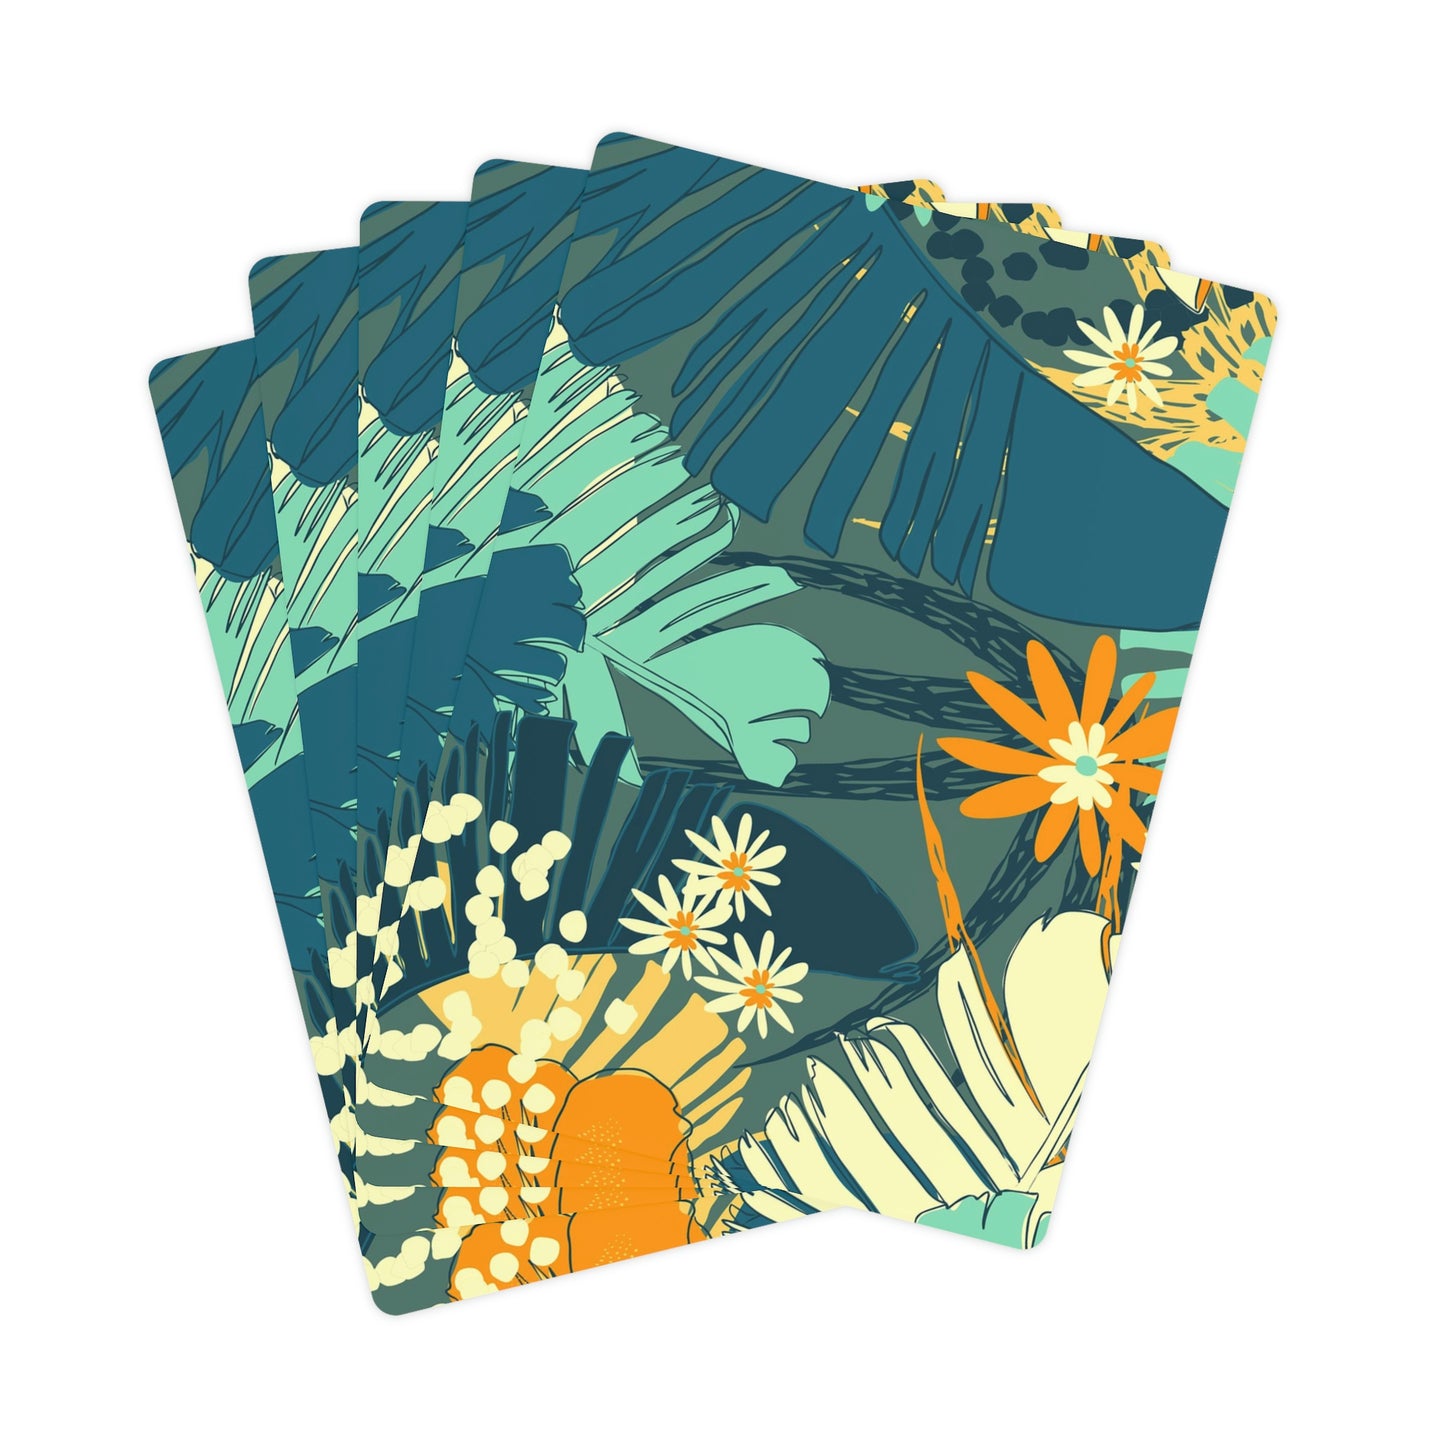 Jungle Blues Collection Poker Cards, Tropical Designer Poker Cards for your Vacation or Airbnb Home.